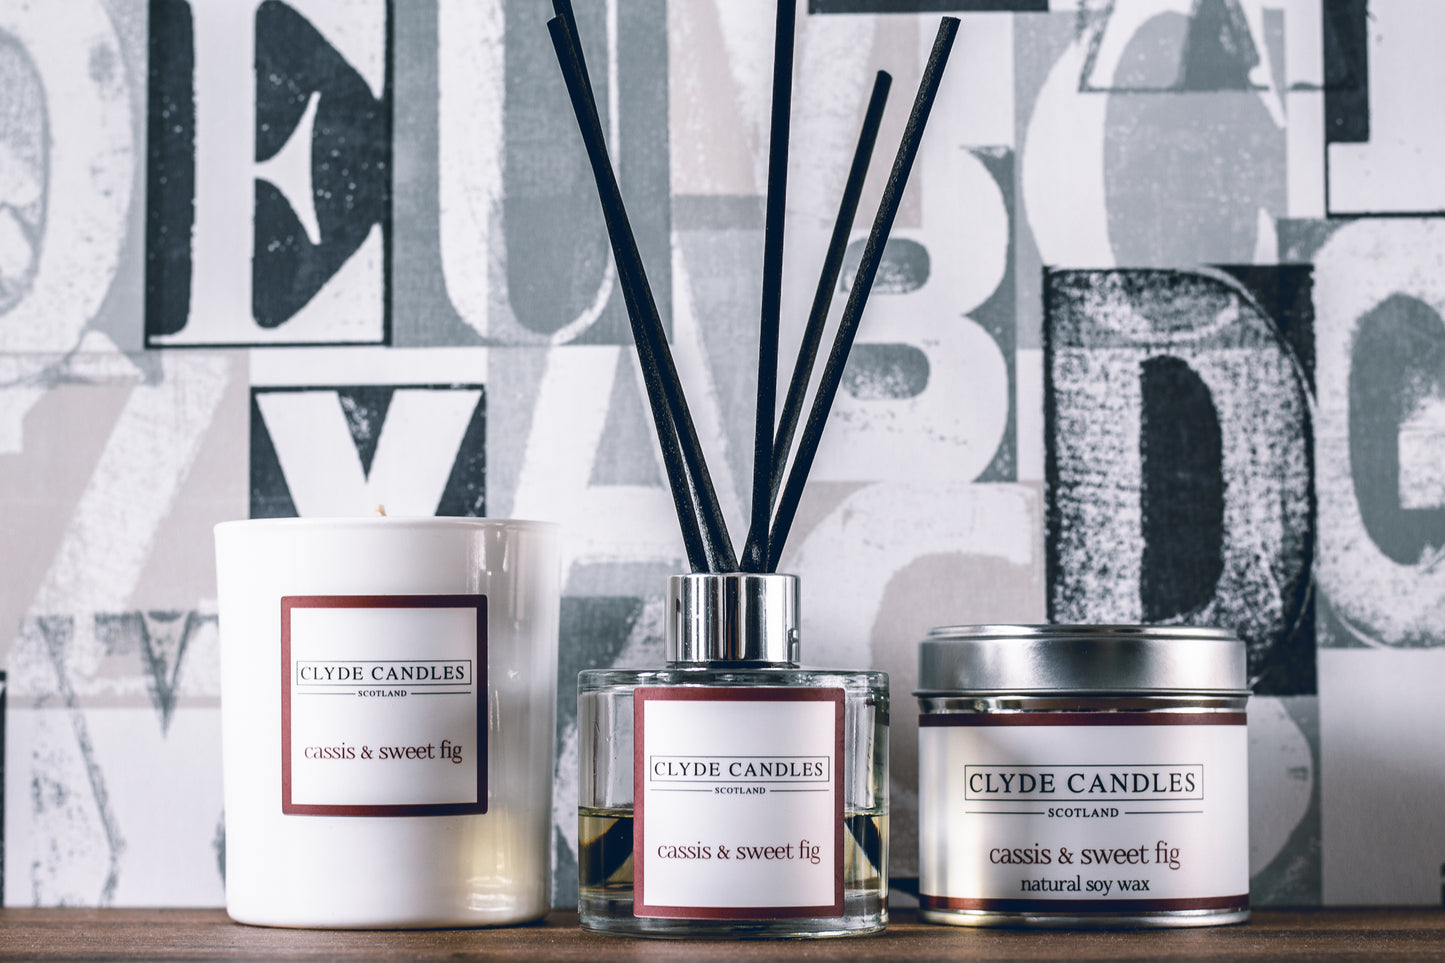 Cassis & Sweet Fig Reed Diffuser - Clyde Candles, Luxury Diffuser Oil with a Set of 7 Fibre Sticks, 100ml, Best Aroma Scent for Home, Kitchen, Living Room, Bathroom. Fragrance Diffusers set with sticks